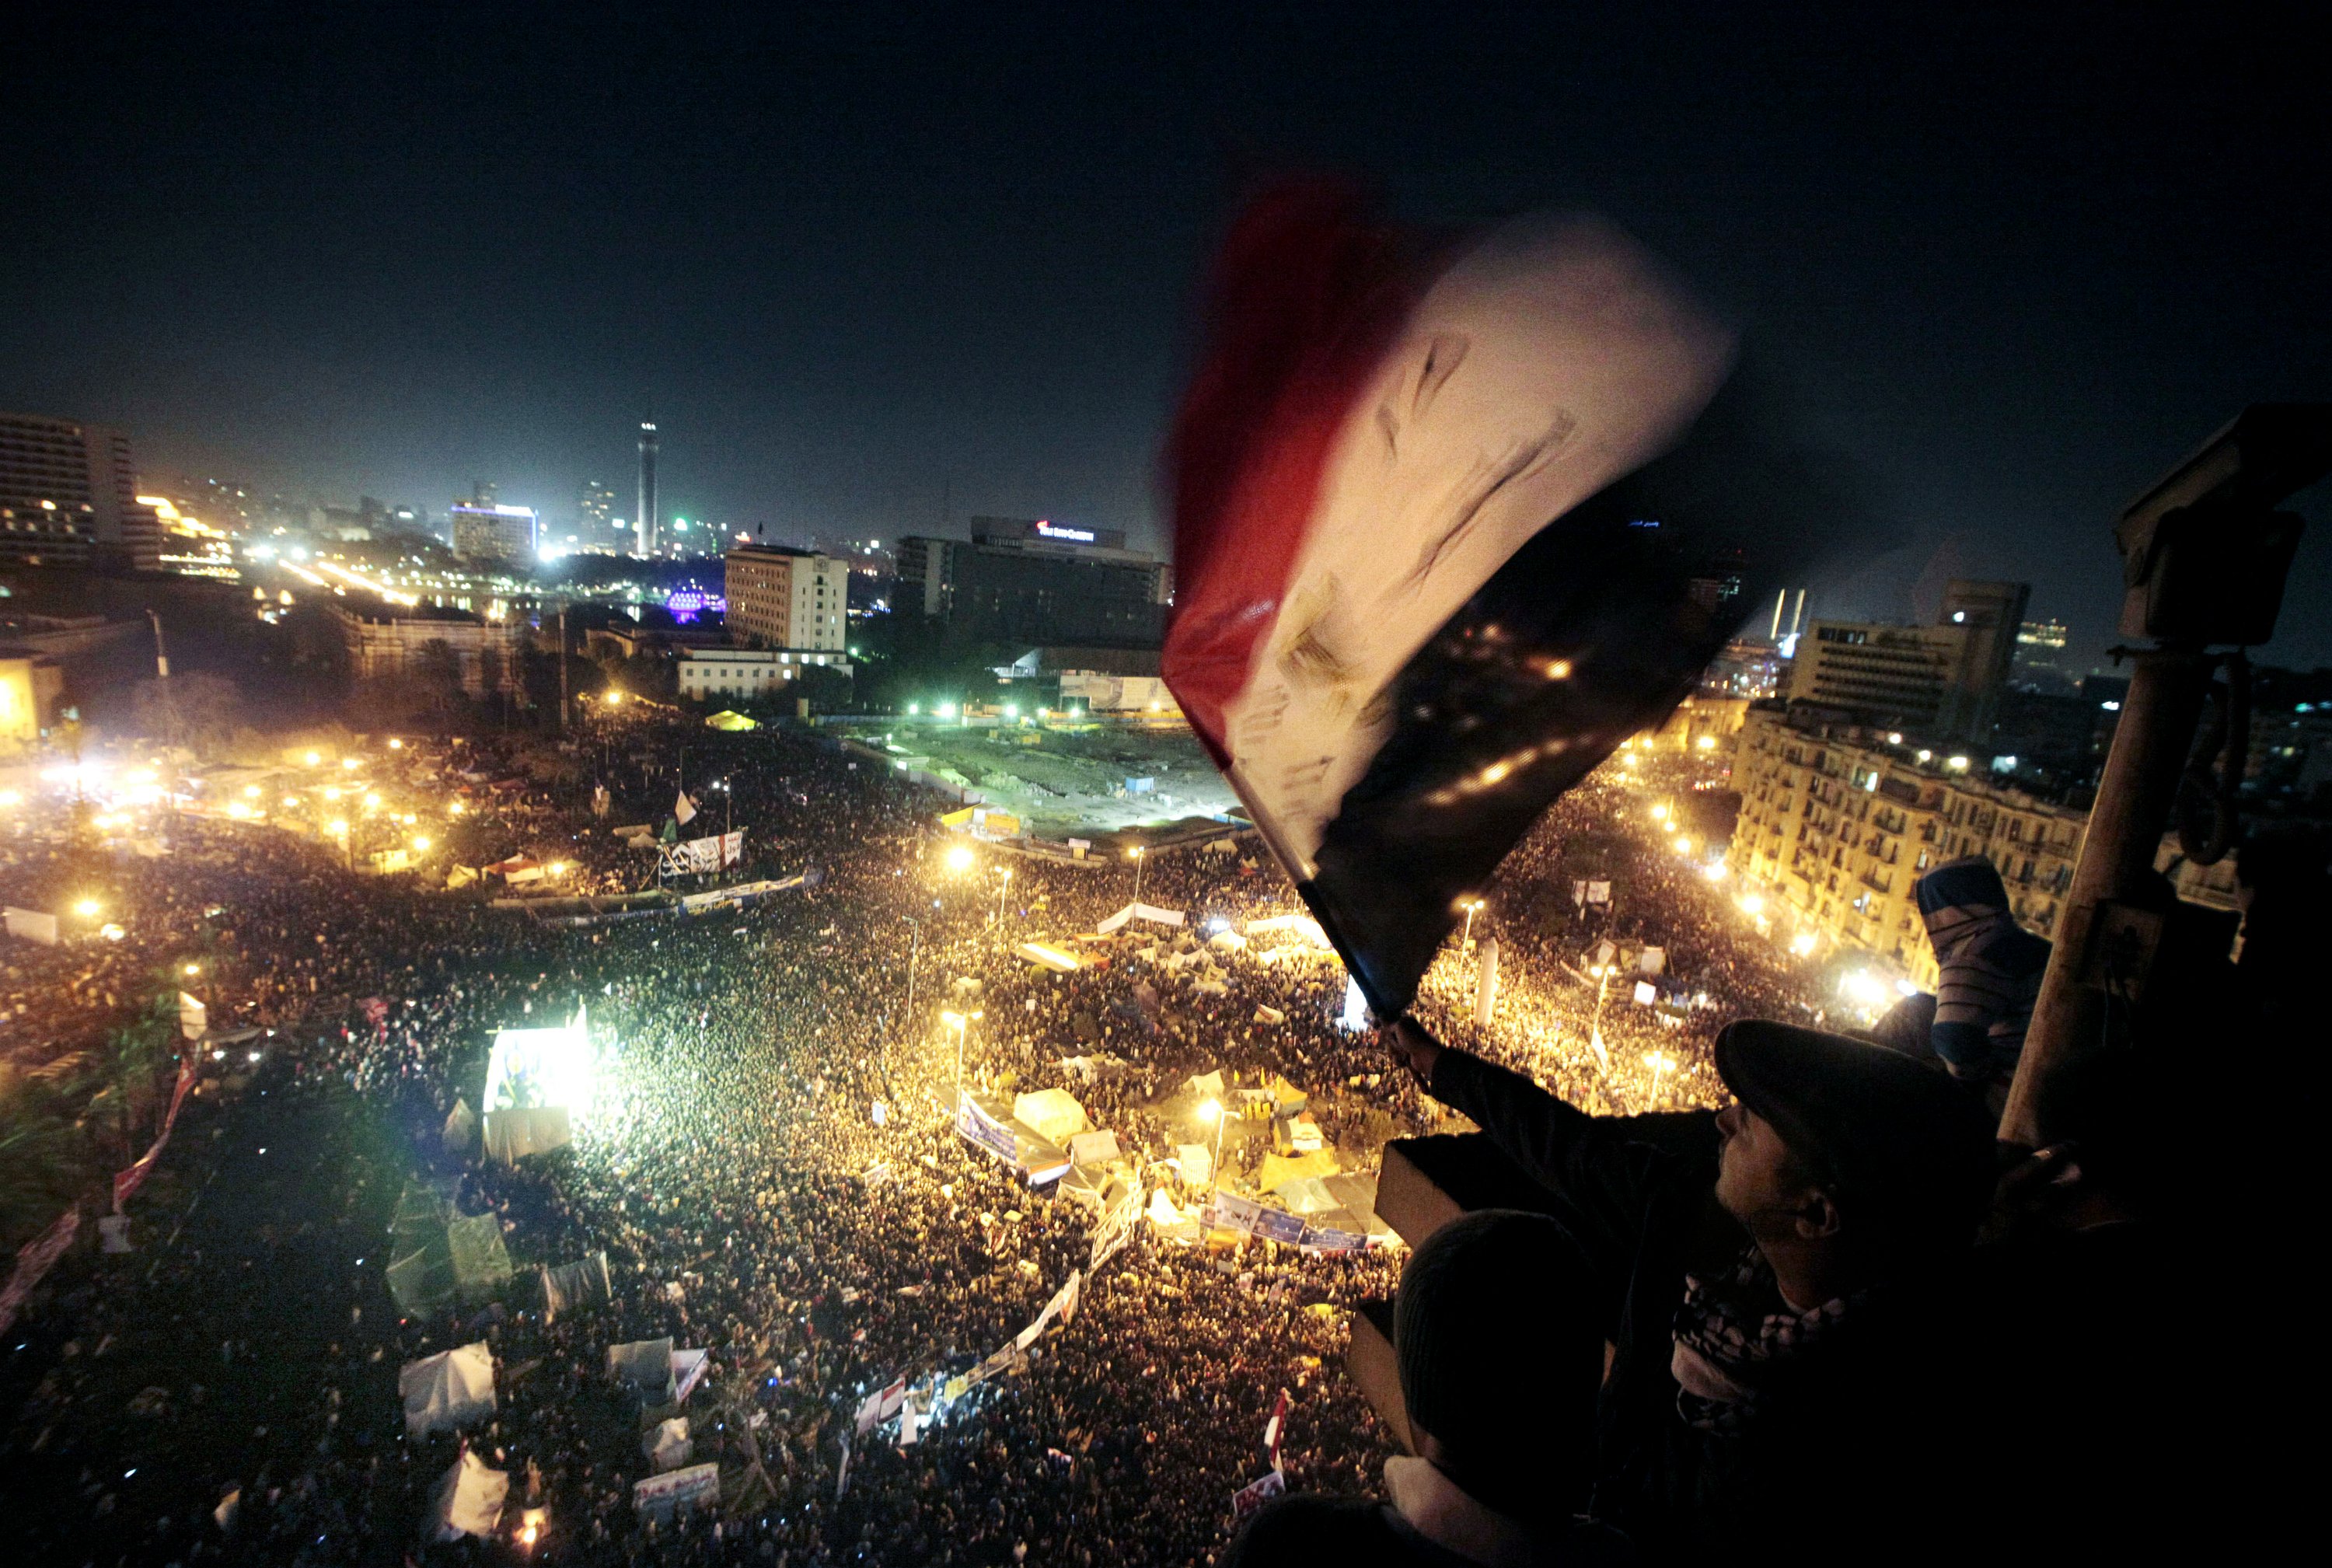 Arab Spring exiles look back 10 years after Egypt’s uprising